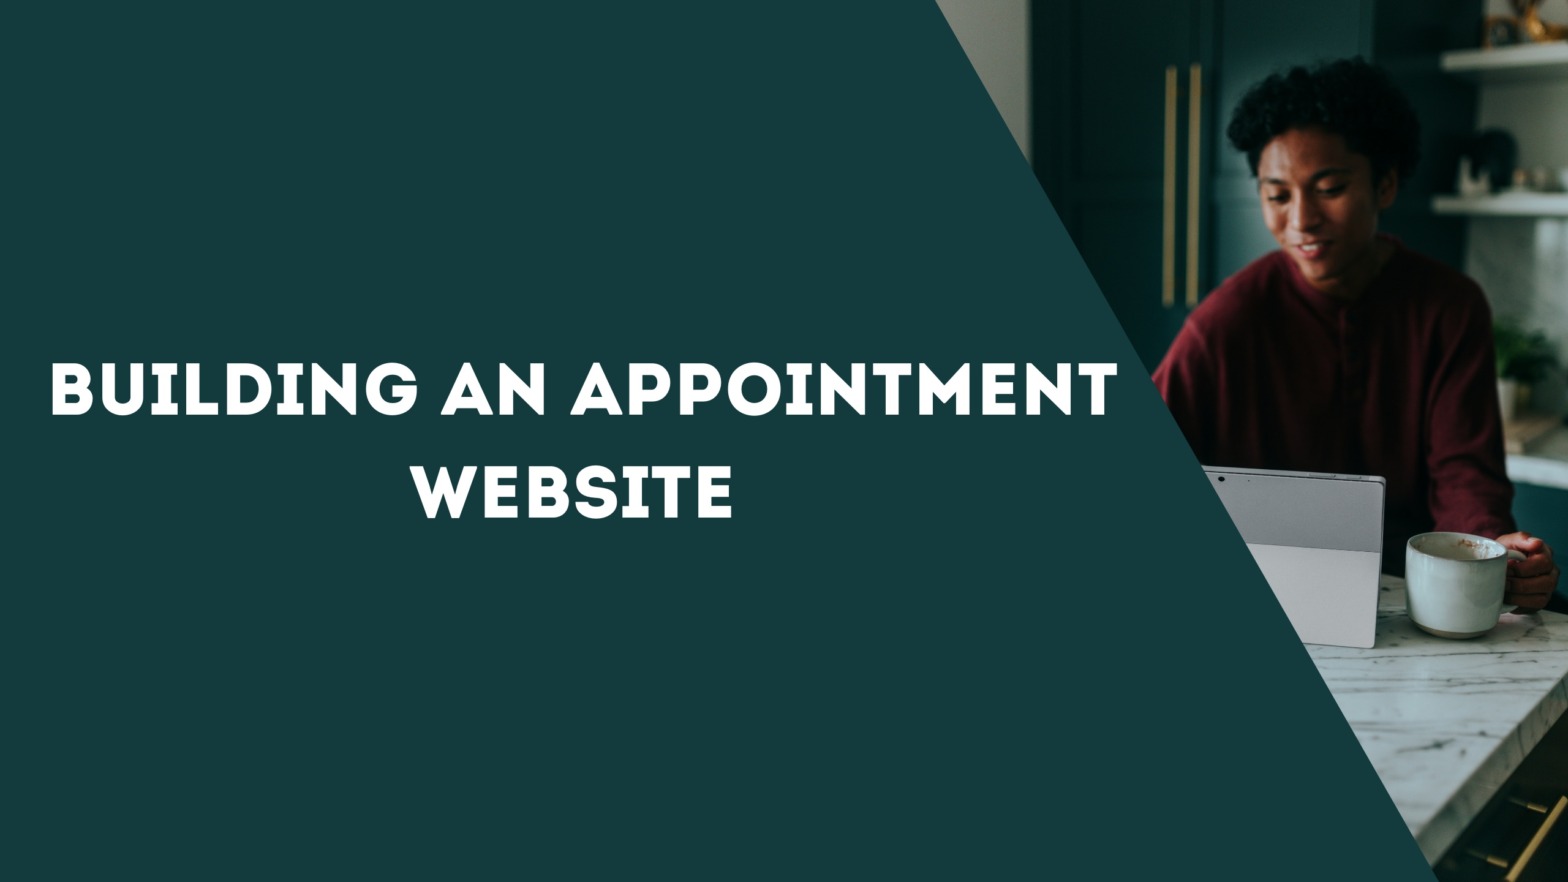 Building an appointment website